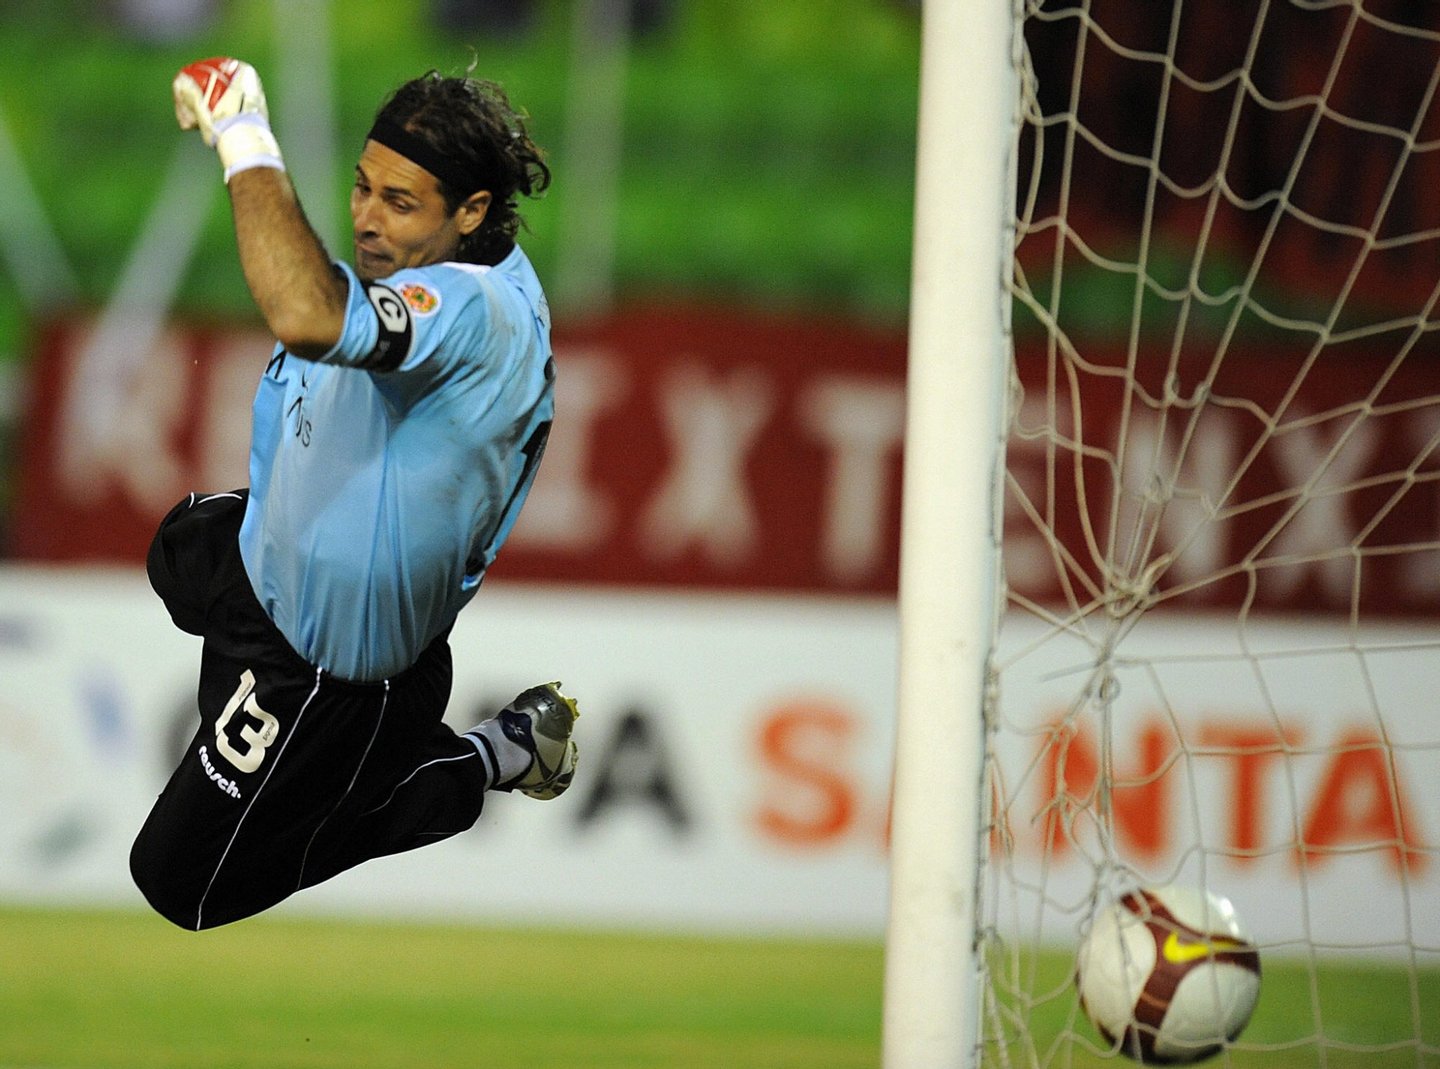 Goalkeeper Carlos Bossio of Argetinian Lanus misses the ball during their 2009 Libertadores Cup football match against Caracas FC at Olimpico Stadium in Caracas February 25, 2009. AFP PHOTO/Juan Barreto (Photo credit should read JUAN BARRETO/AFP/Getty Images)